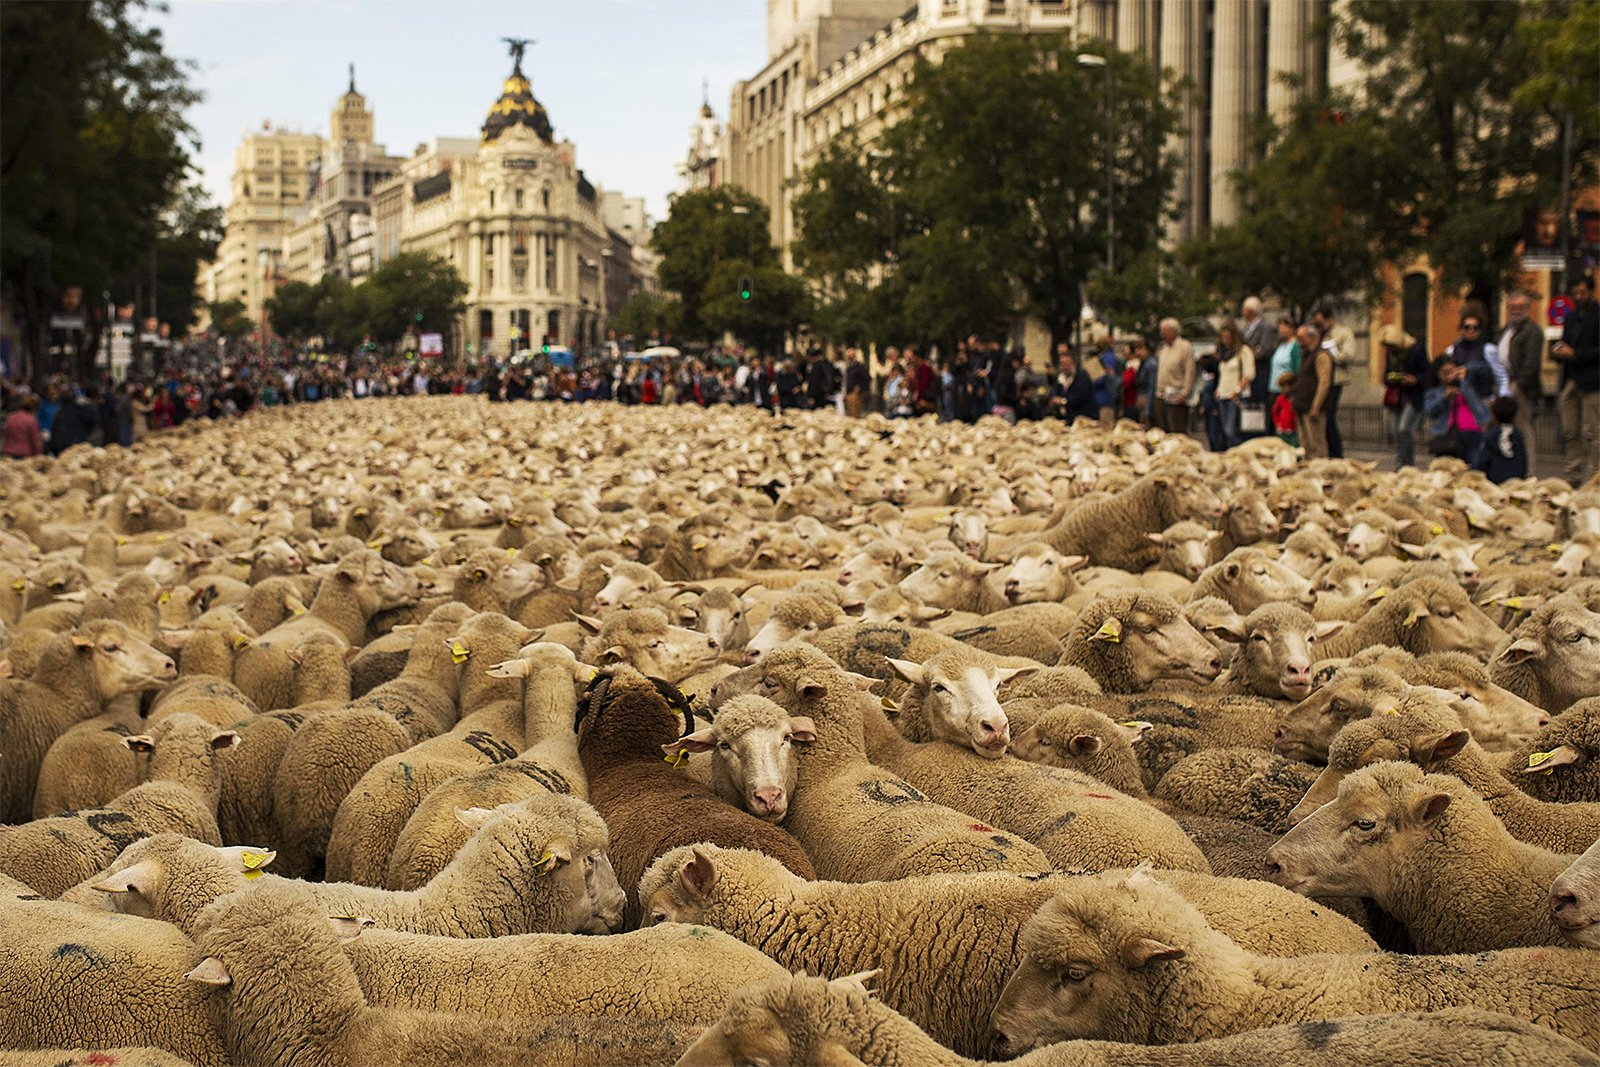 How to see the procession of sheep through the city in Madrid